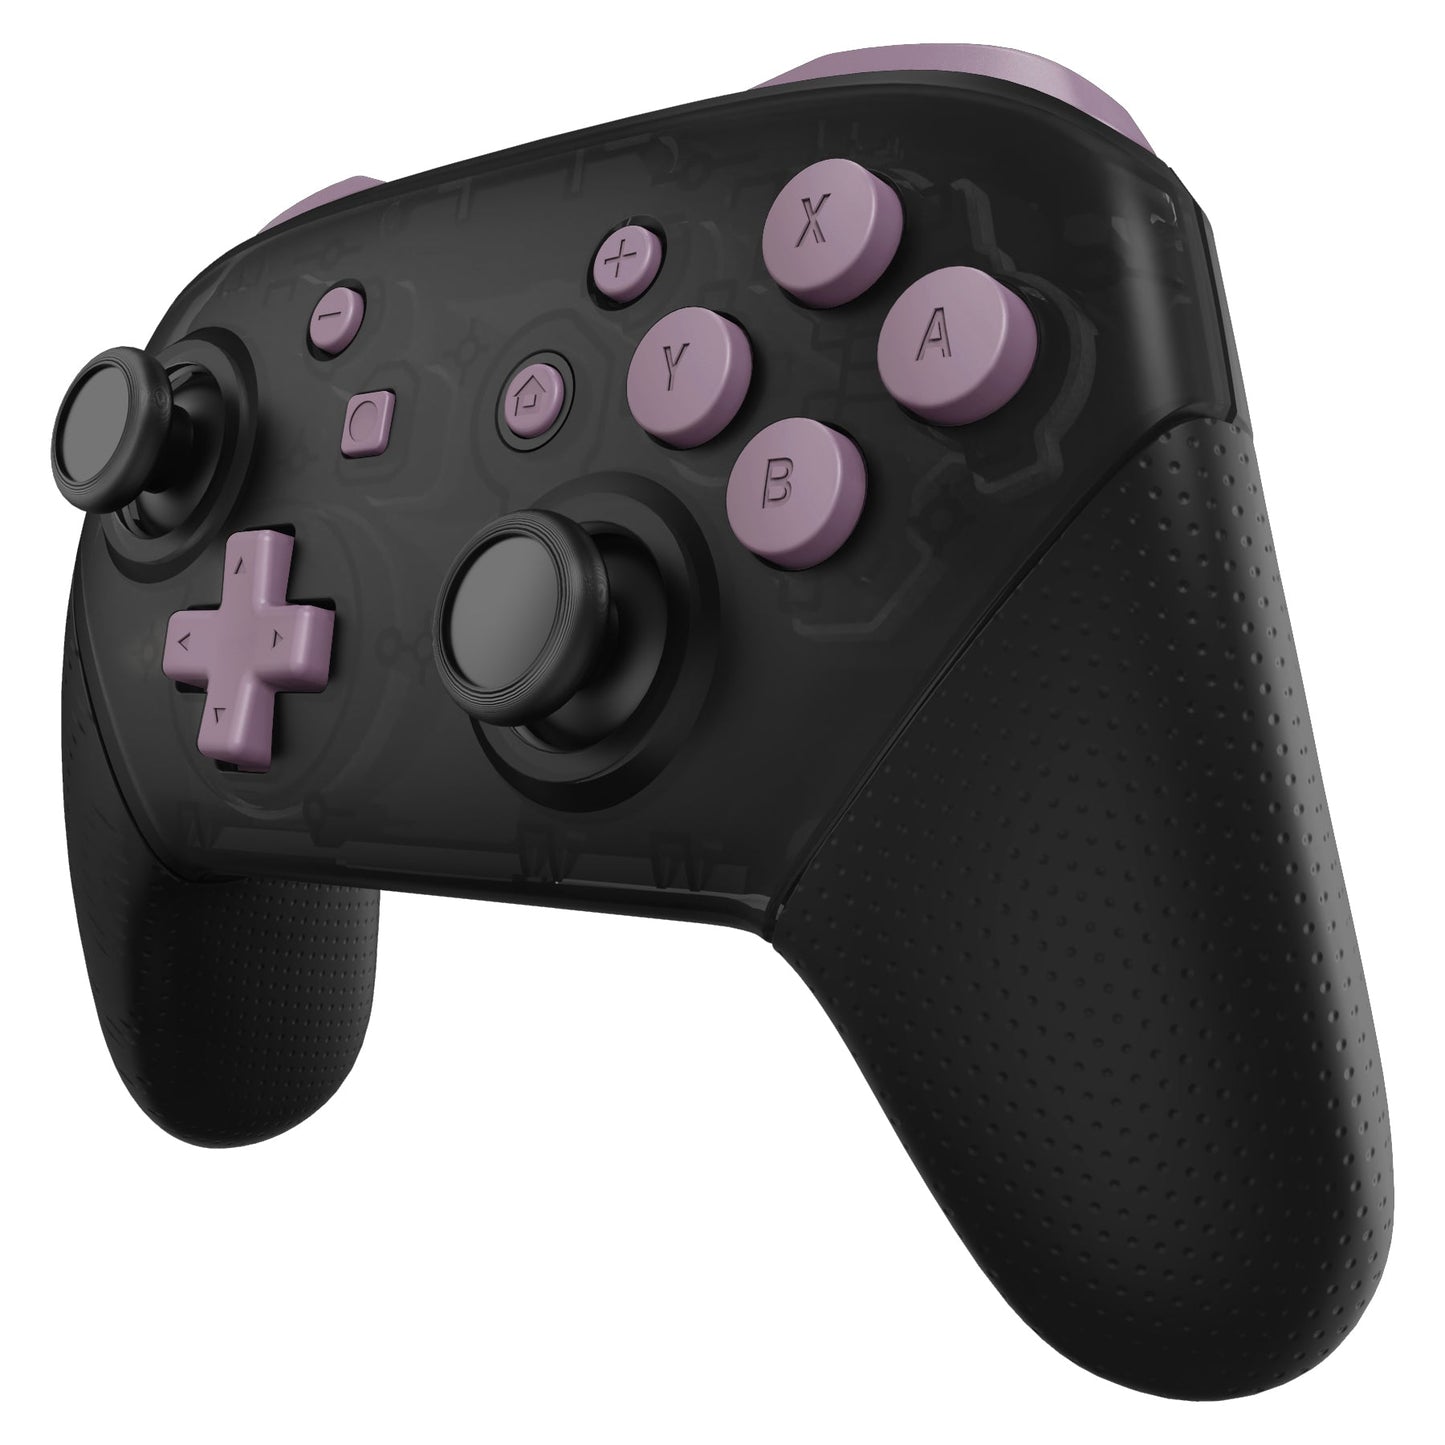 eXtremeRate Retail Dark Grayish Violet Repair ABXY D-pad ZR ZL L R Keys for NS Switch Pro Controller, DIY Replacement Full Set Buttons with Tools for NS Switch Pro - Controller NOT Included - KRP328